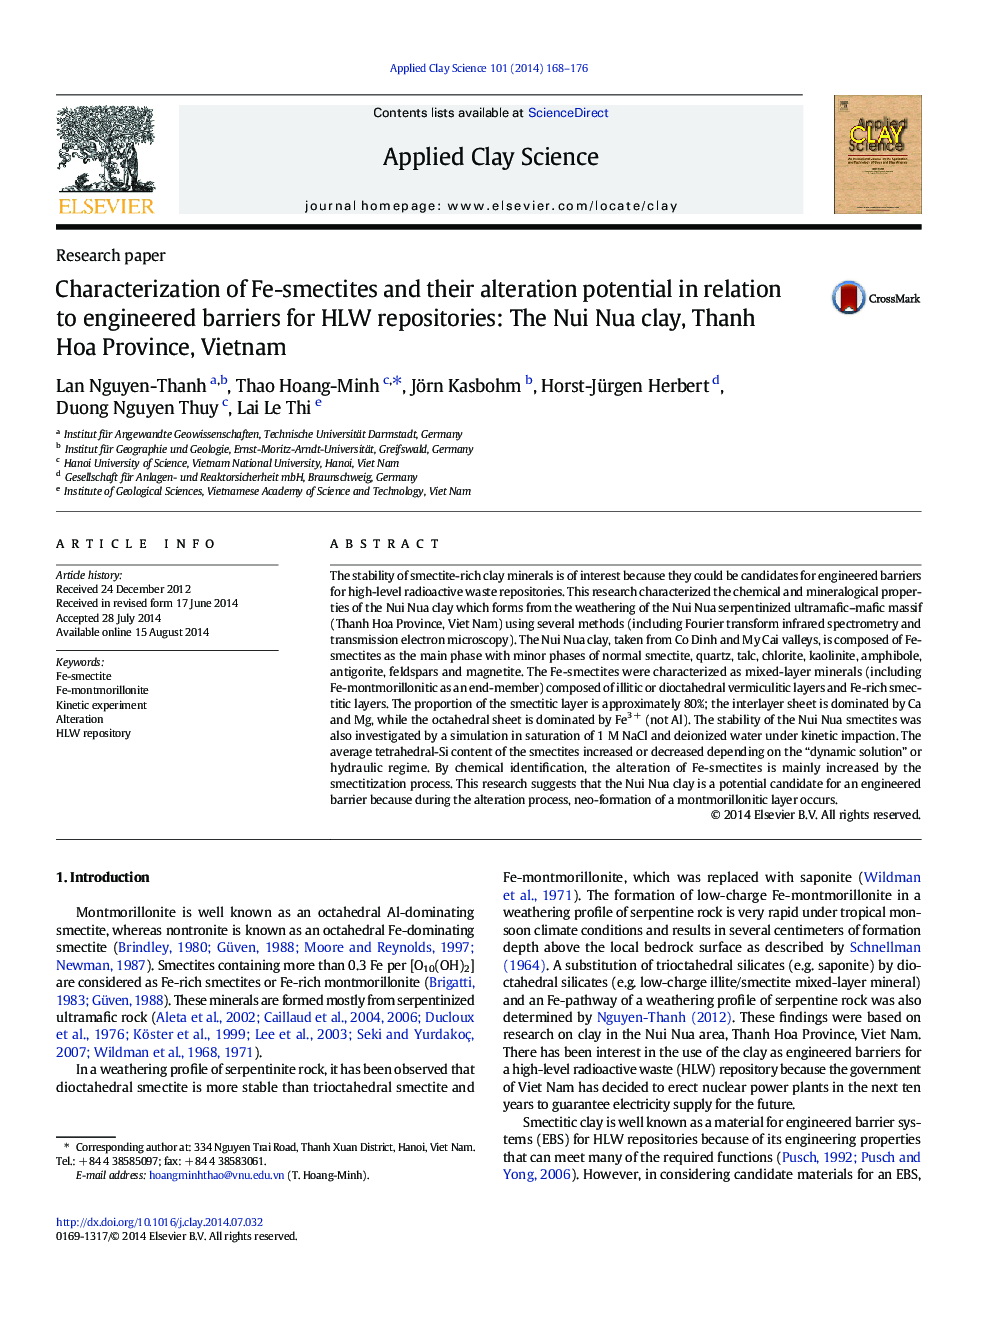 Characterization of Fe-smectites and their alteration potential in relation to engineered barriers for HLW repositories: The Nui Nua clay, Thanh Hoa Province, Vietnam